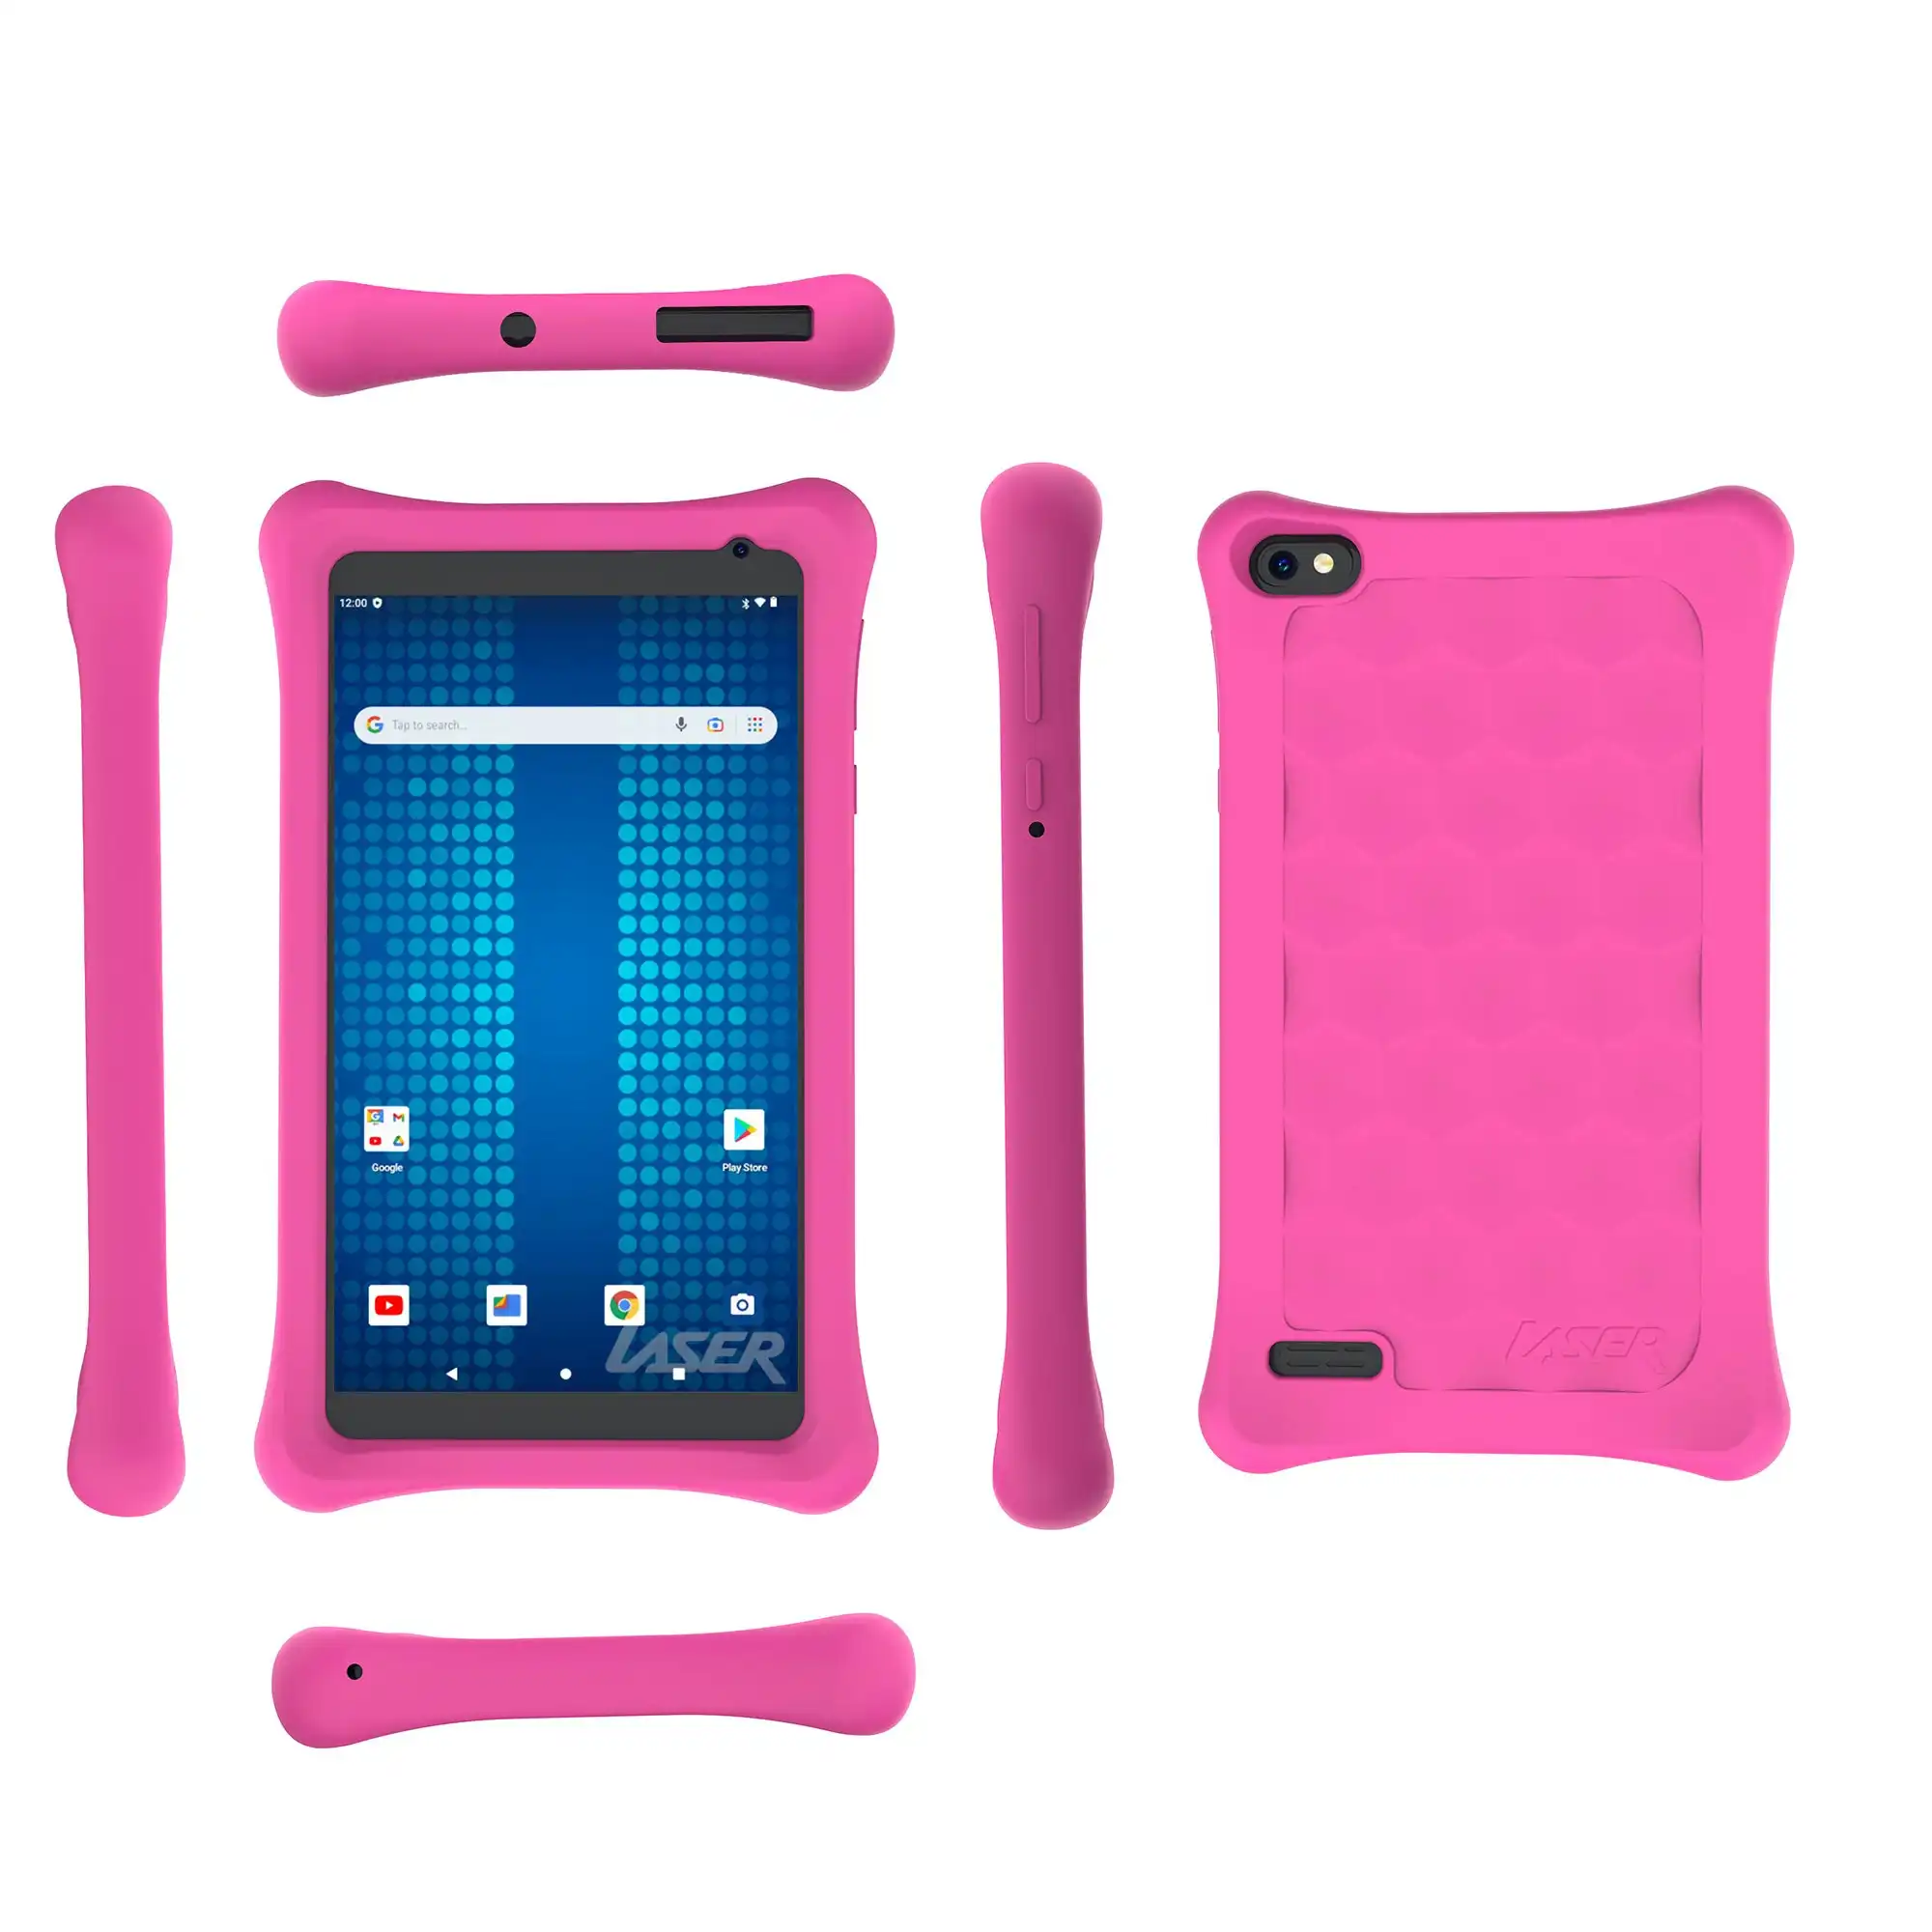 Laser 7 inch Quadcore IPS Tablet 32GB with Pink Case